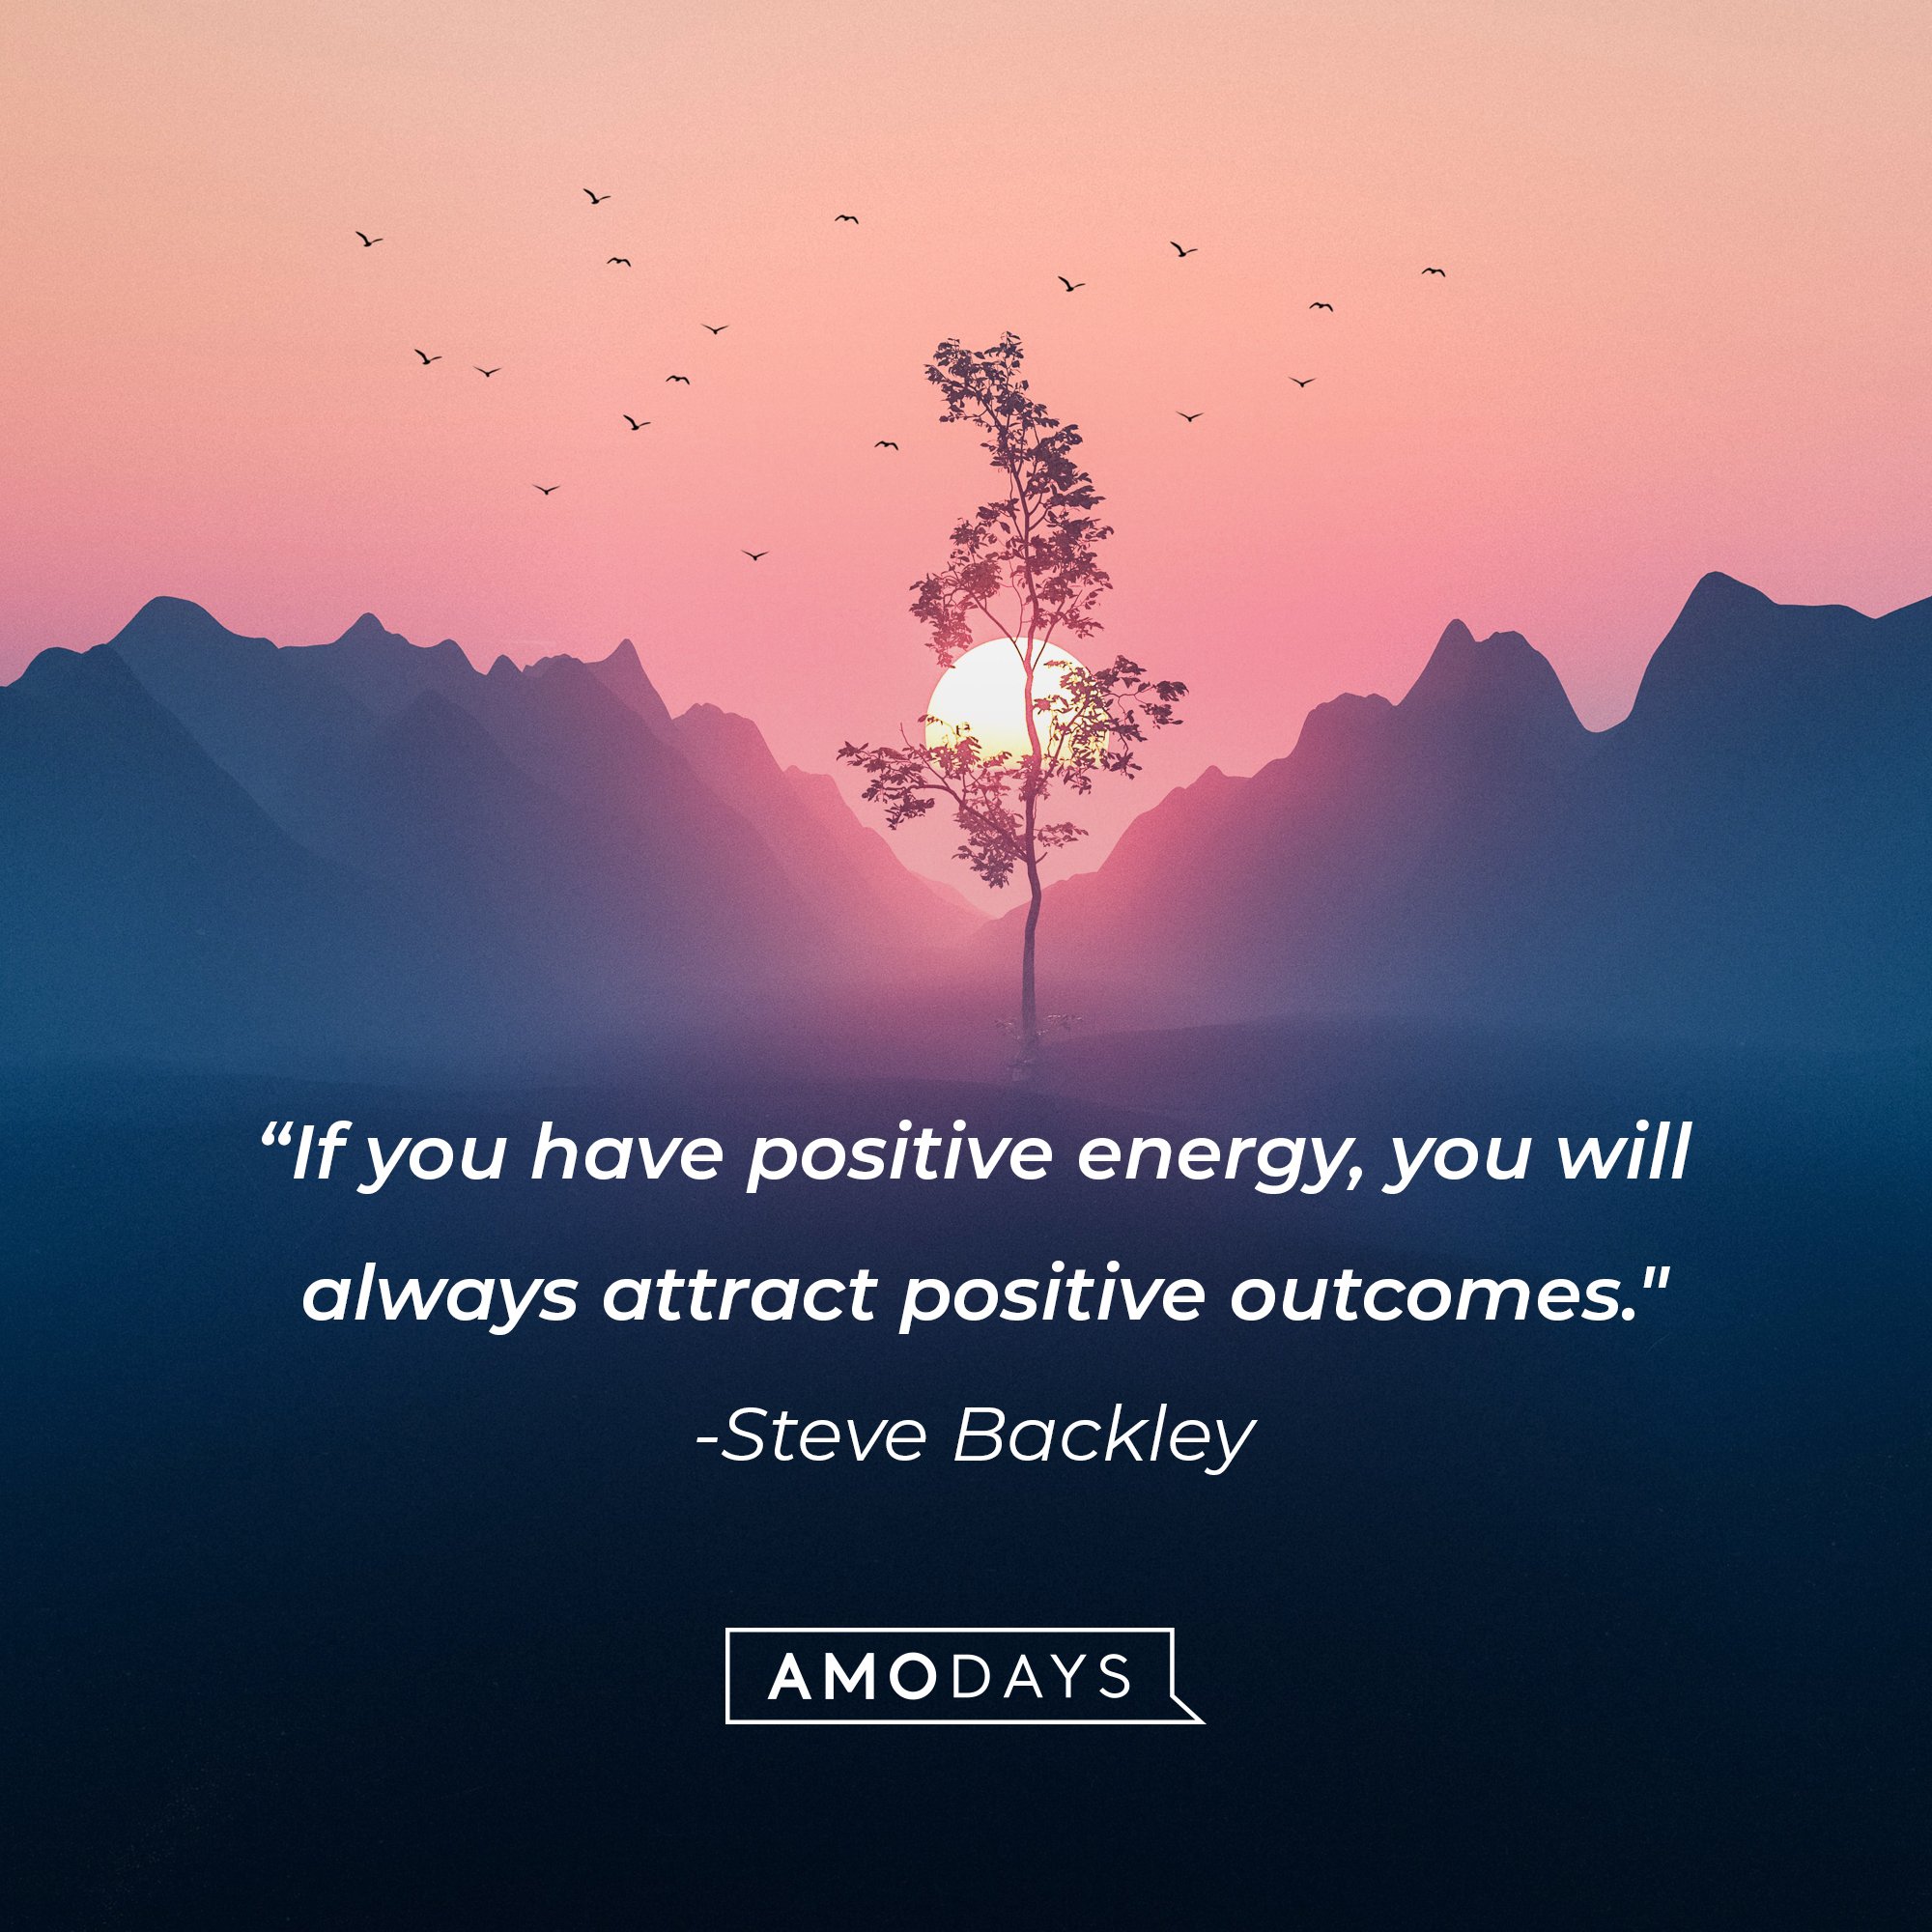 Steve Backley’s quote: “If you have positive energy, you will always attract positive outcomes." | Image: AmoDays   